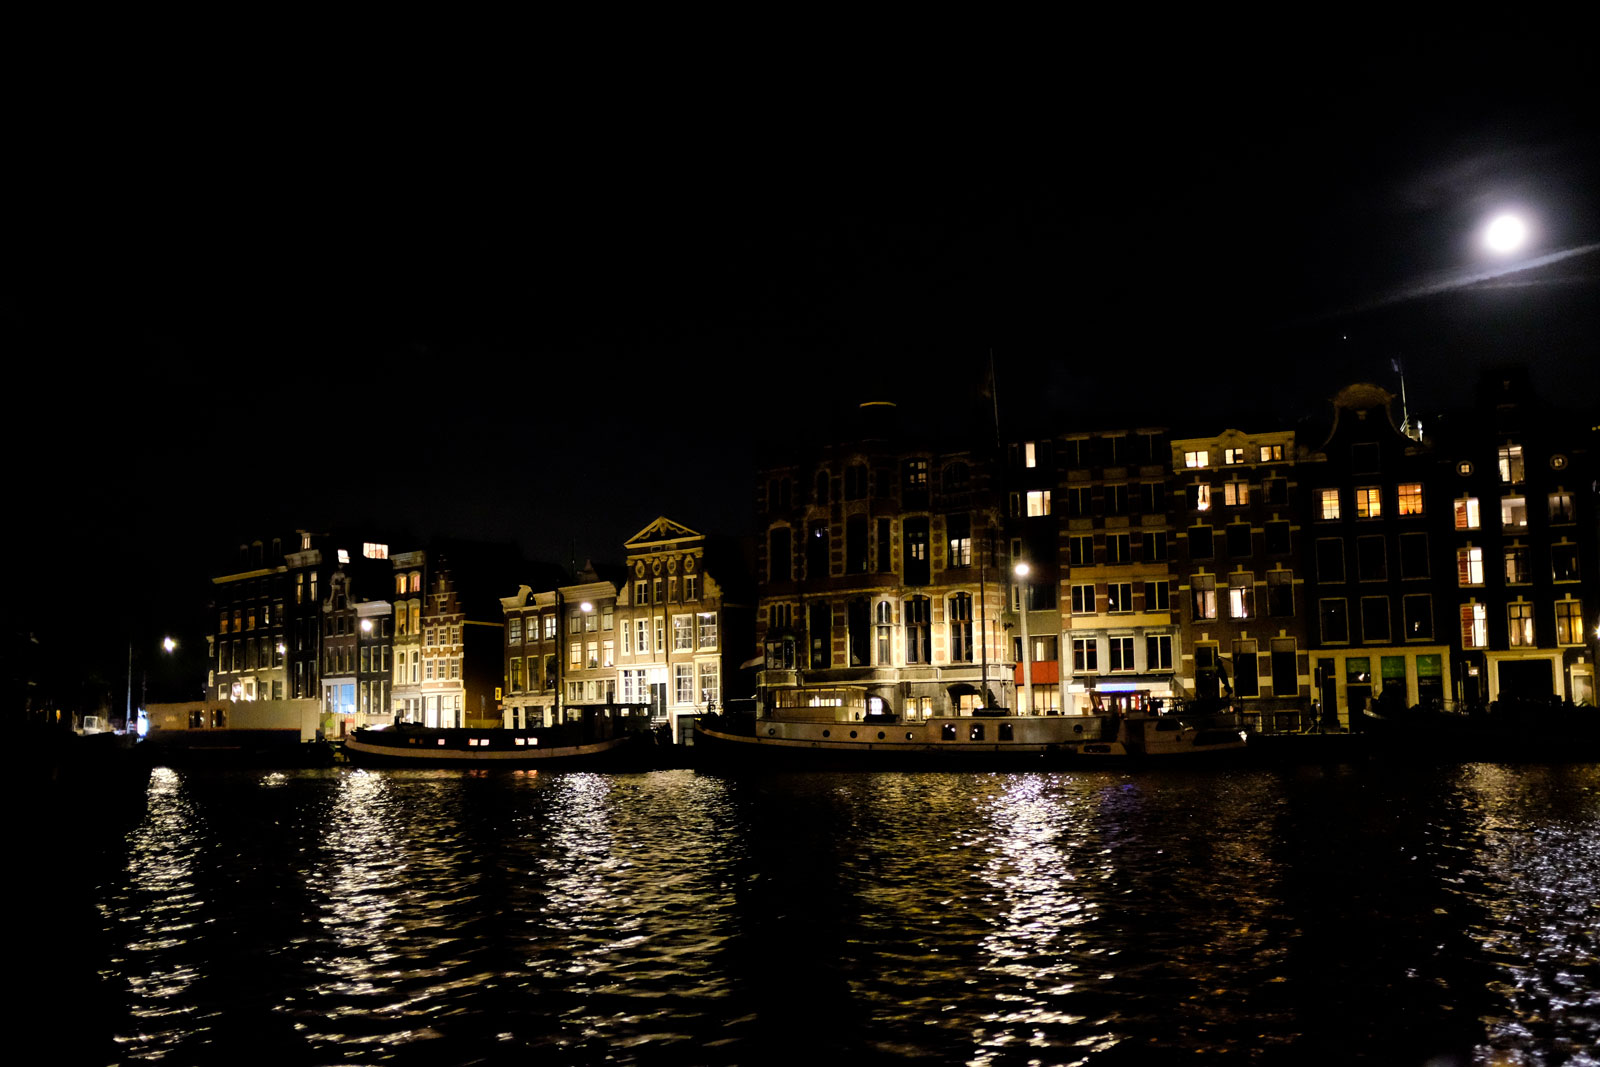 Scenes from an Amsterdam Canal Cruise